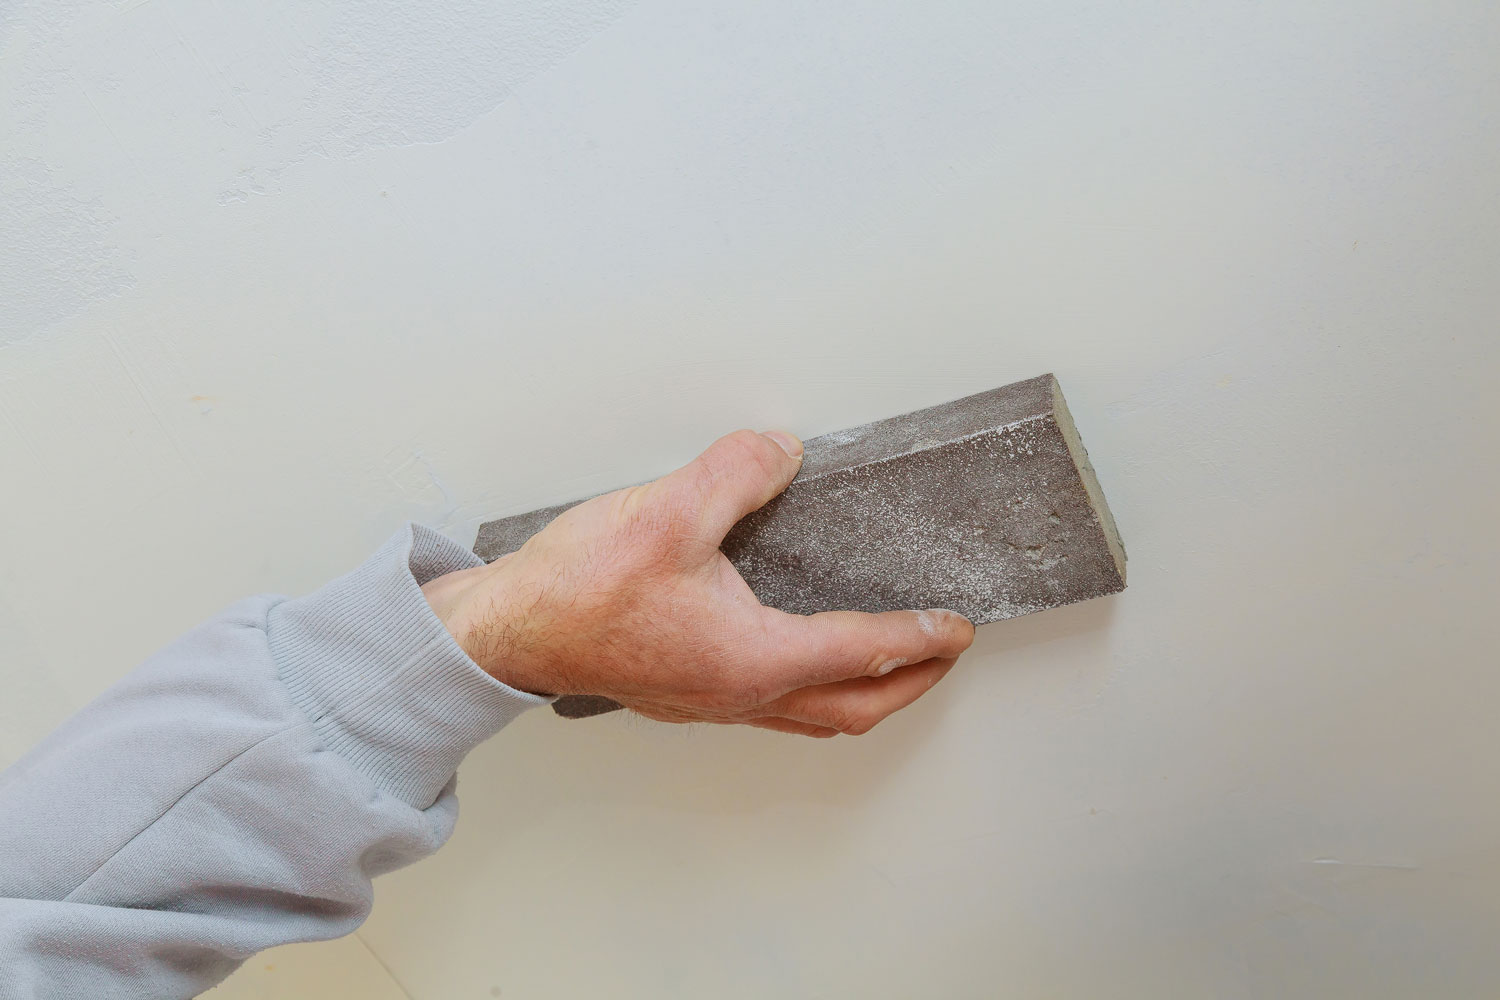 How to Sand Concrete Walls